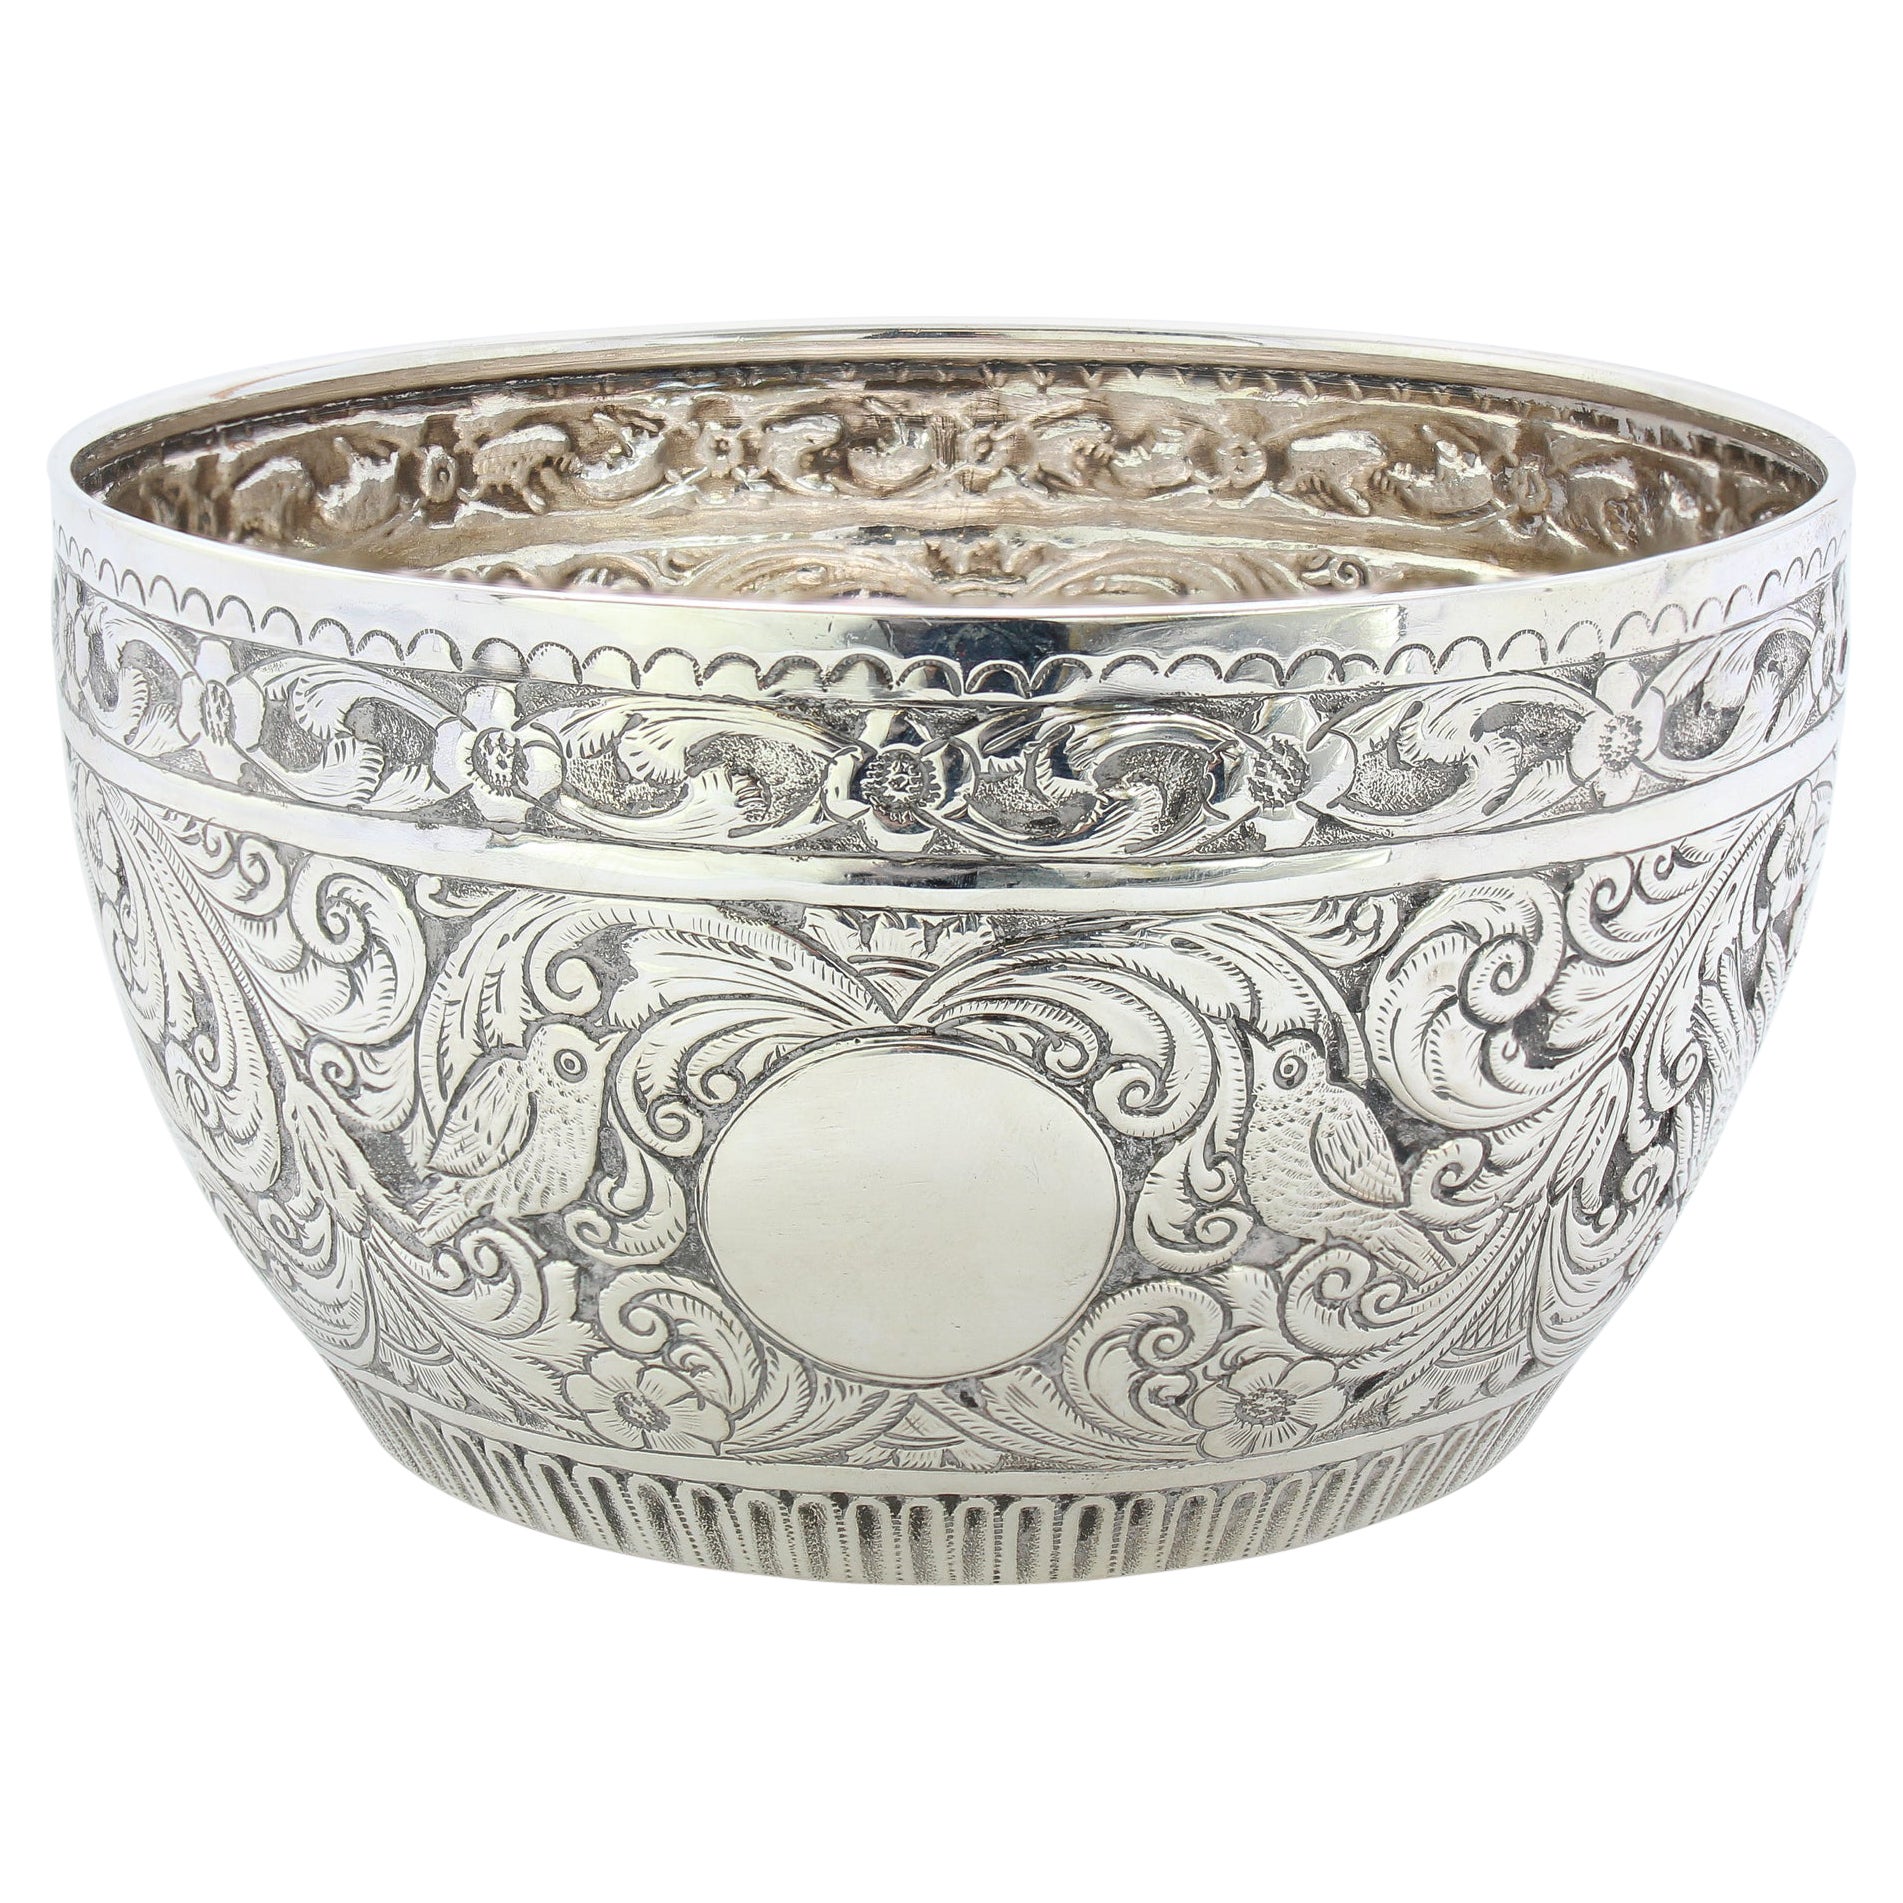 Antique Victorian Silver Bowl with Birds, Elaborately Engraved, London, 1888